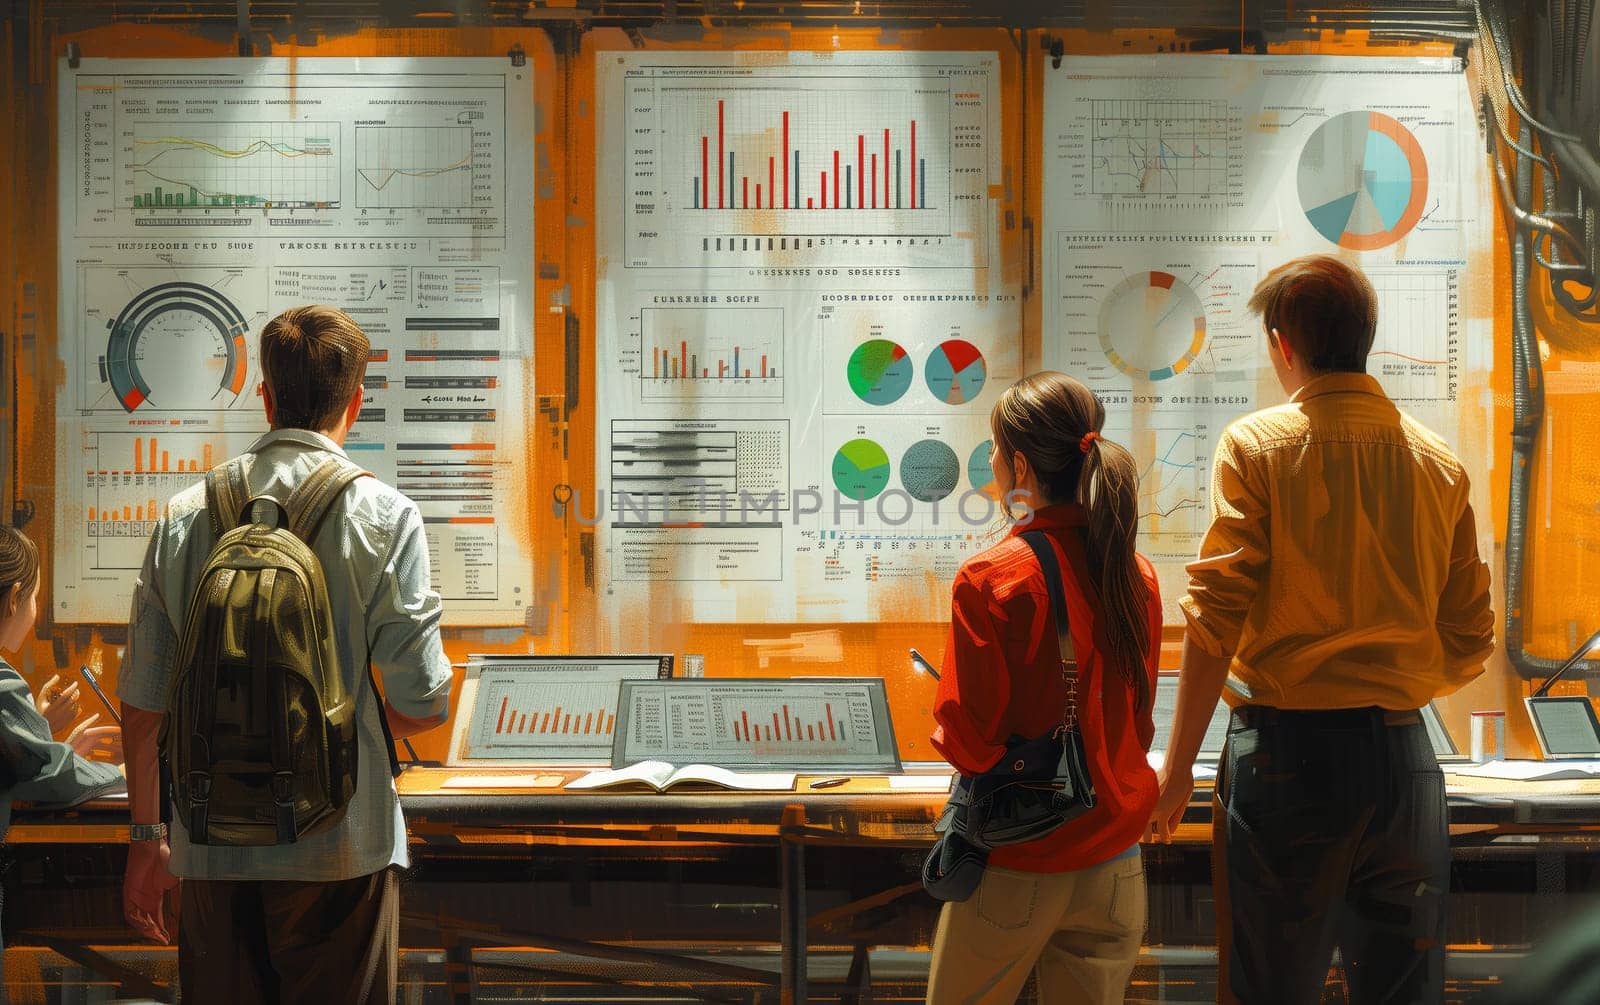 A group of individuals are gathered in a room admiring visual arts displayed on graphs and charts on the wall